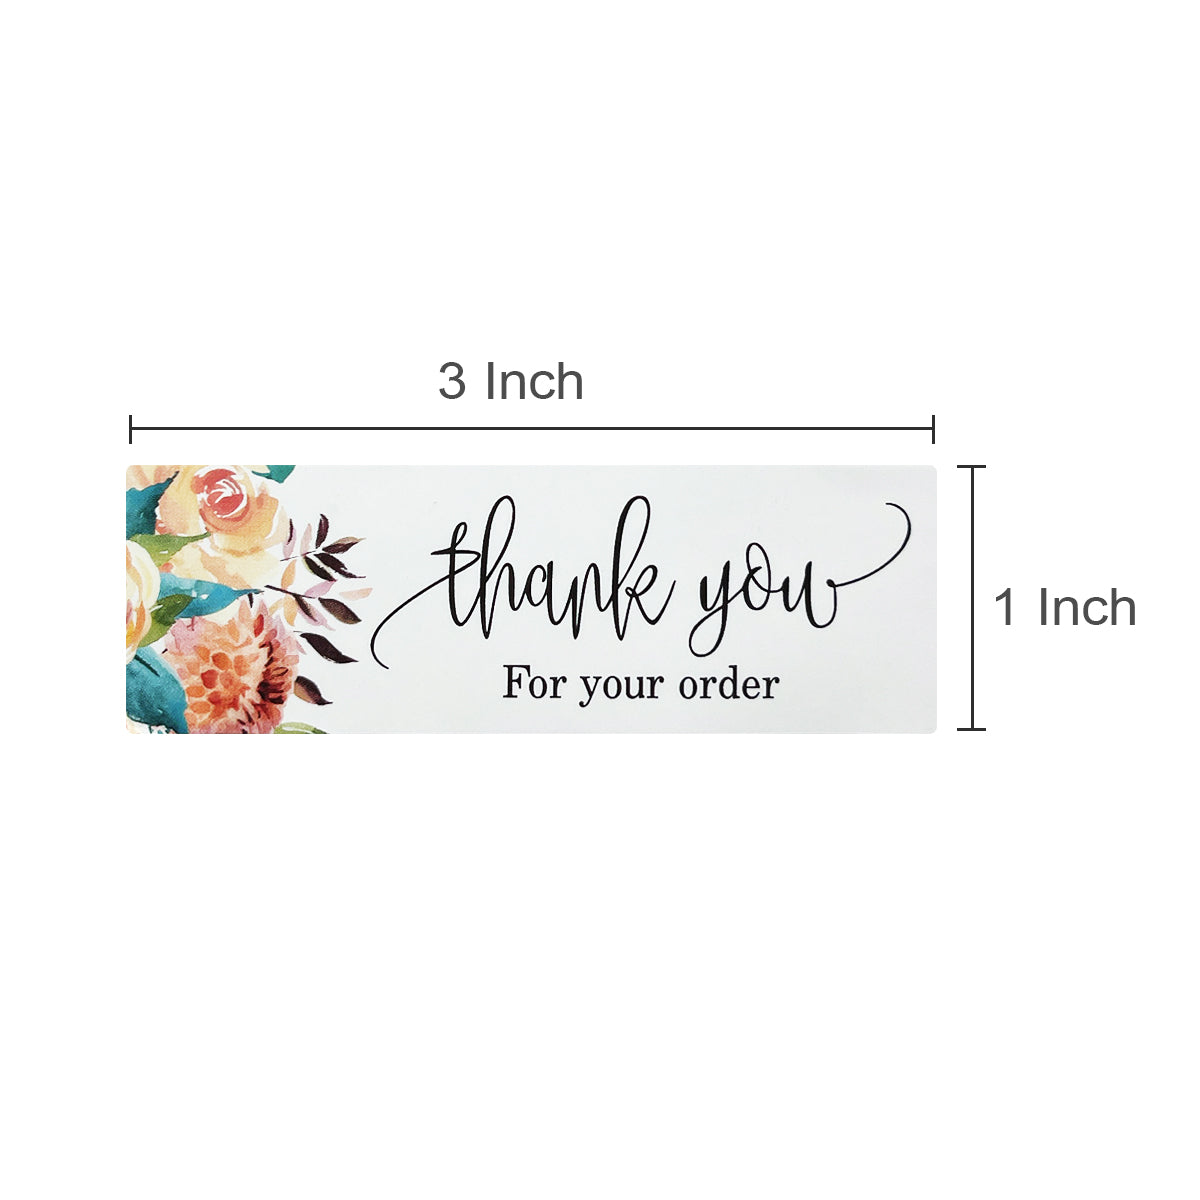 Wrapables 3" x 1" Small Business Thank You Stickers Roll, Sealing Stickers and Labels for Boxes, Envelopes, Bags, Packages